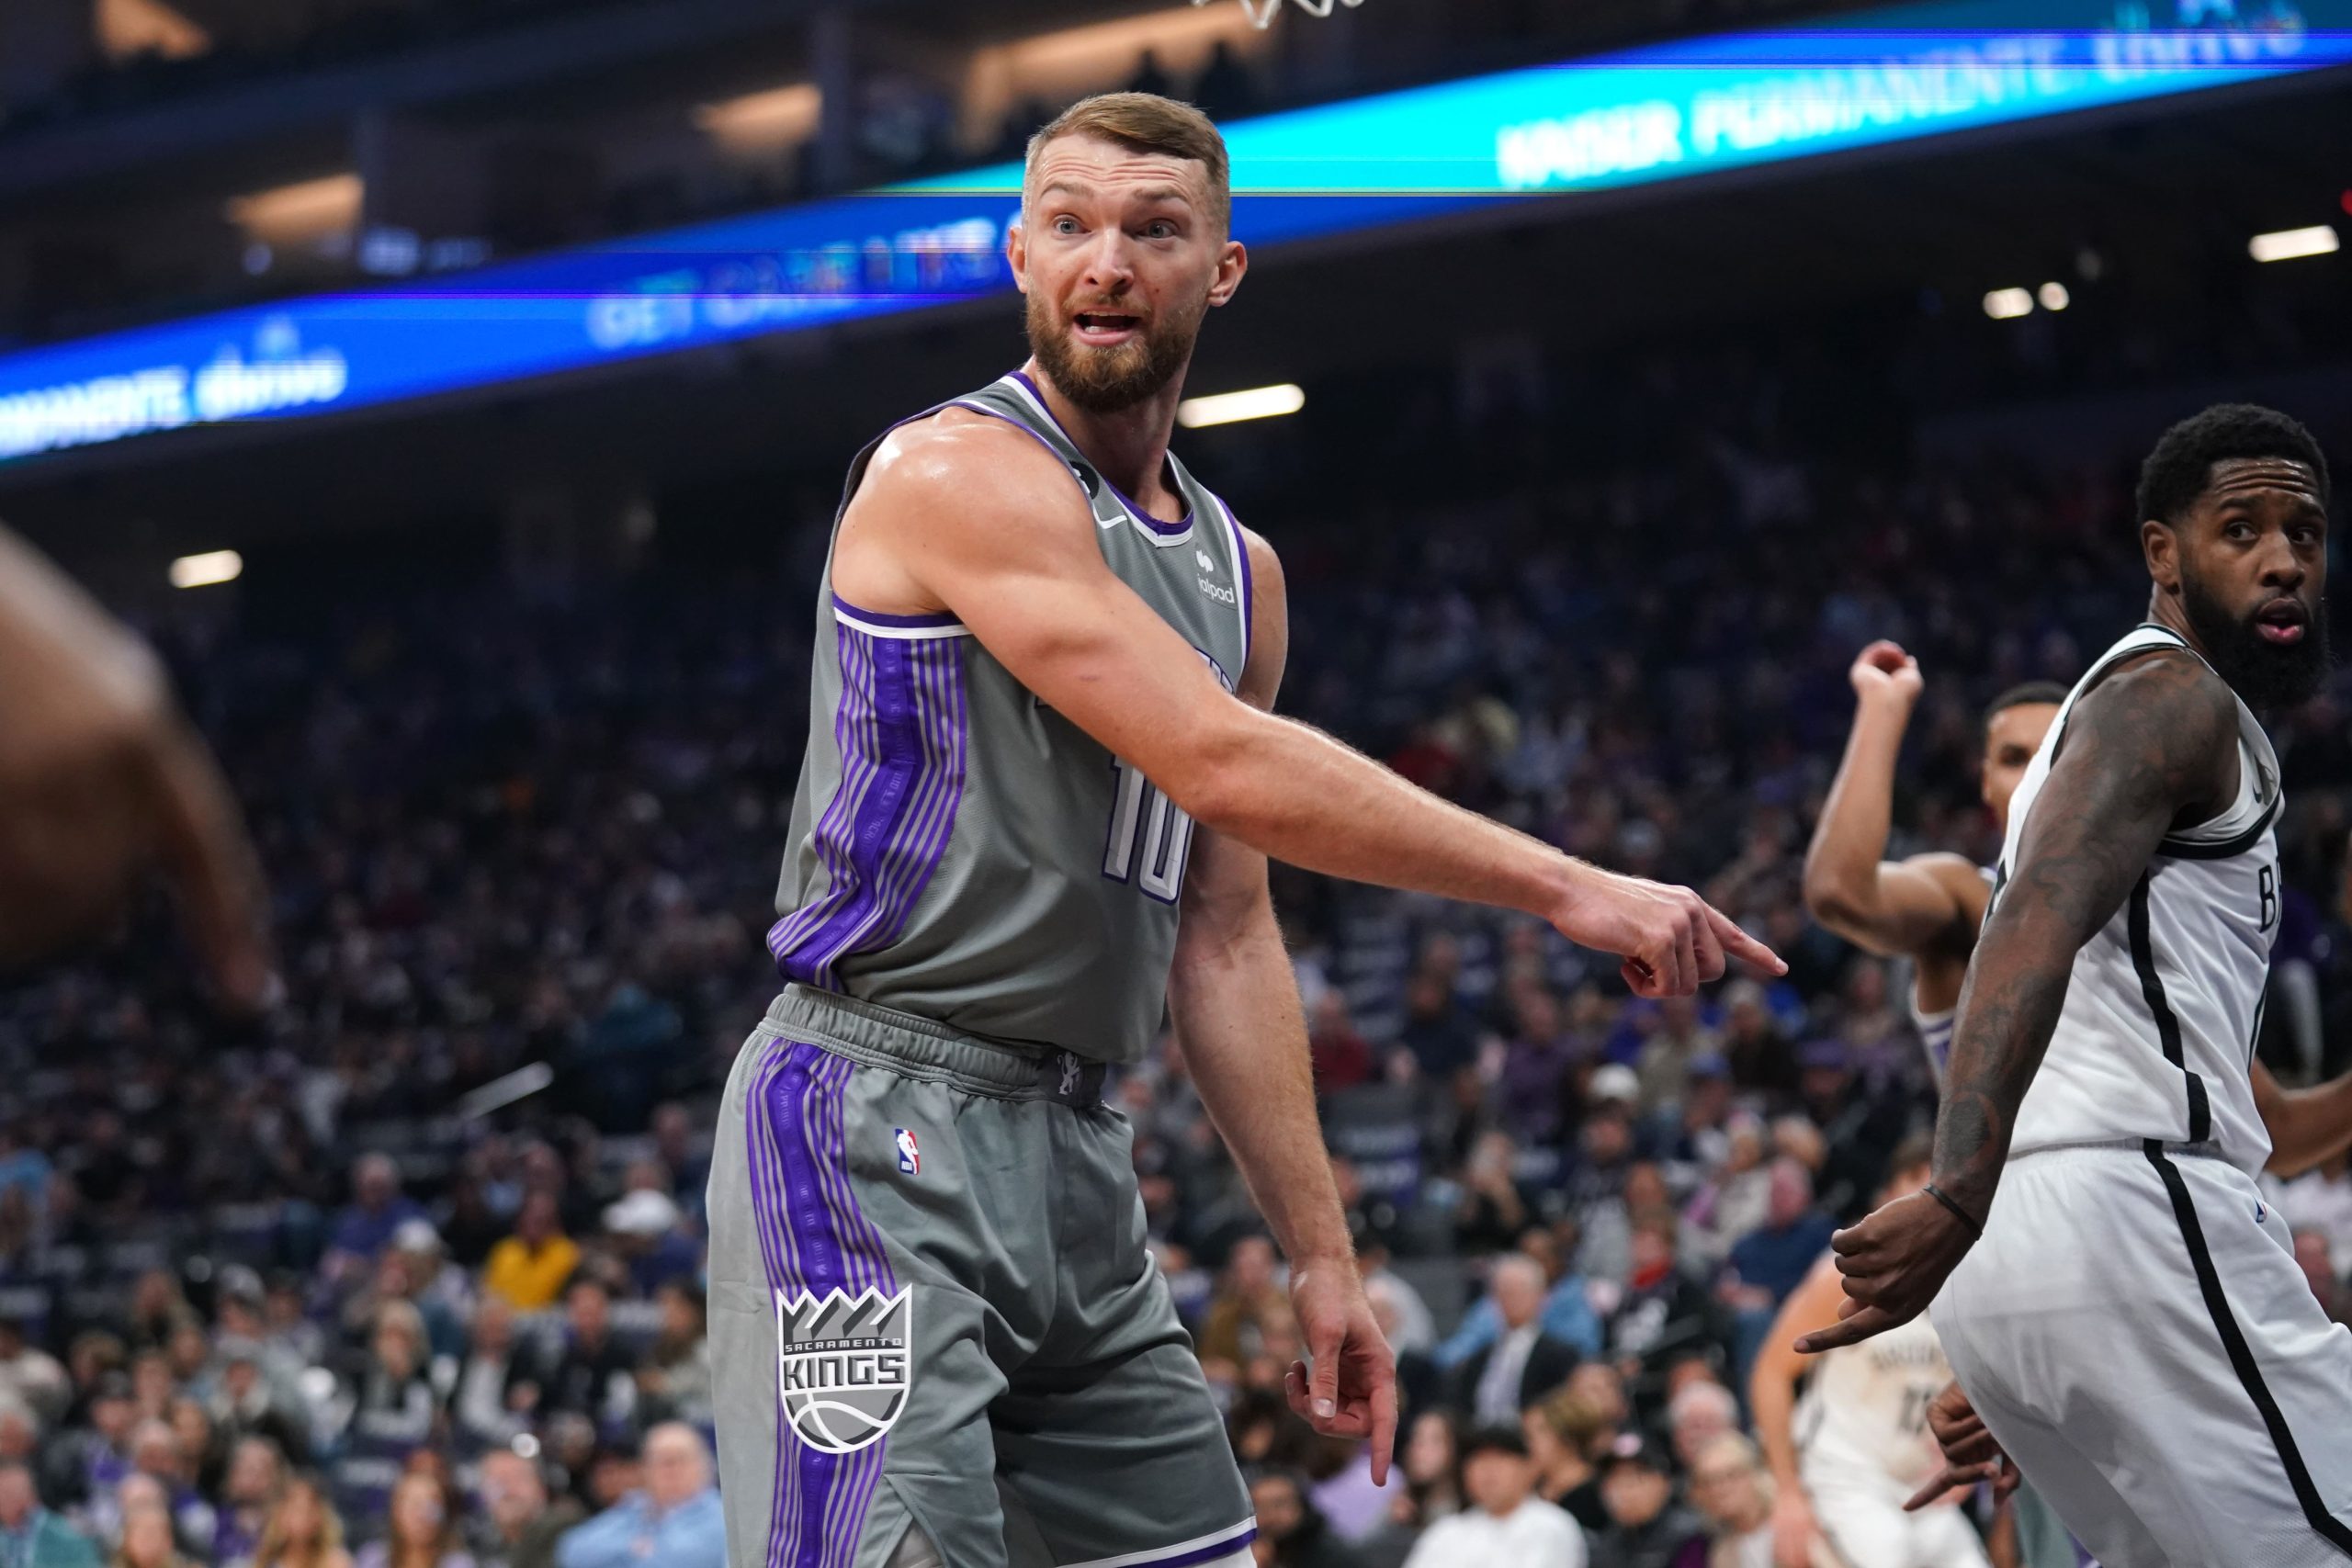 Best NBA player prop bets for Monday, 11/28: Sabonis dictates play